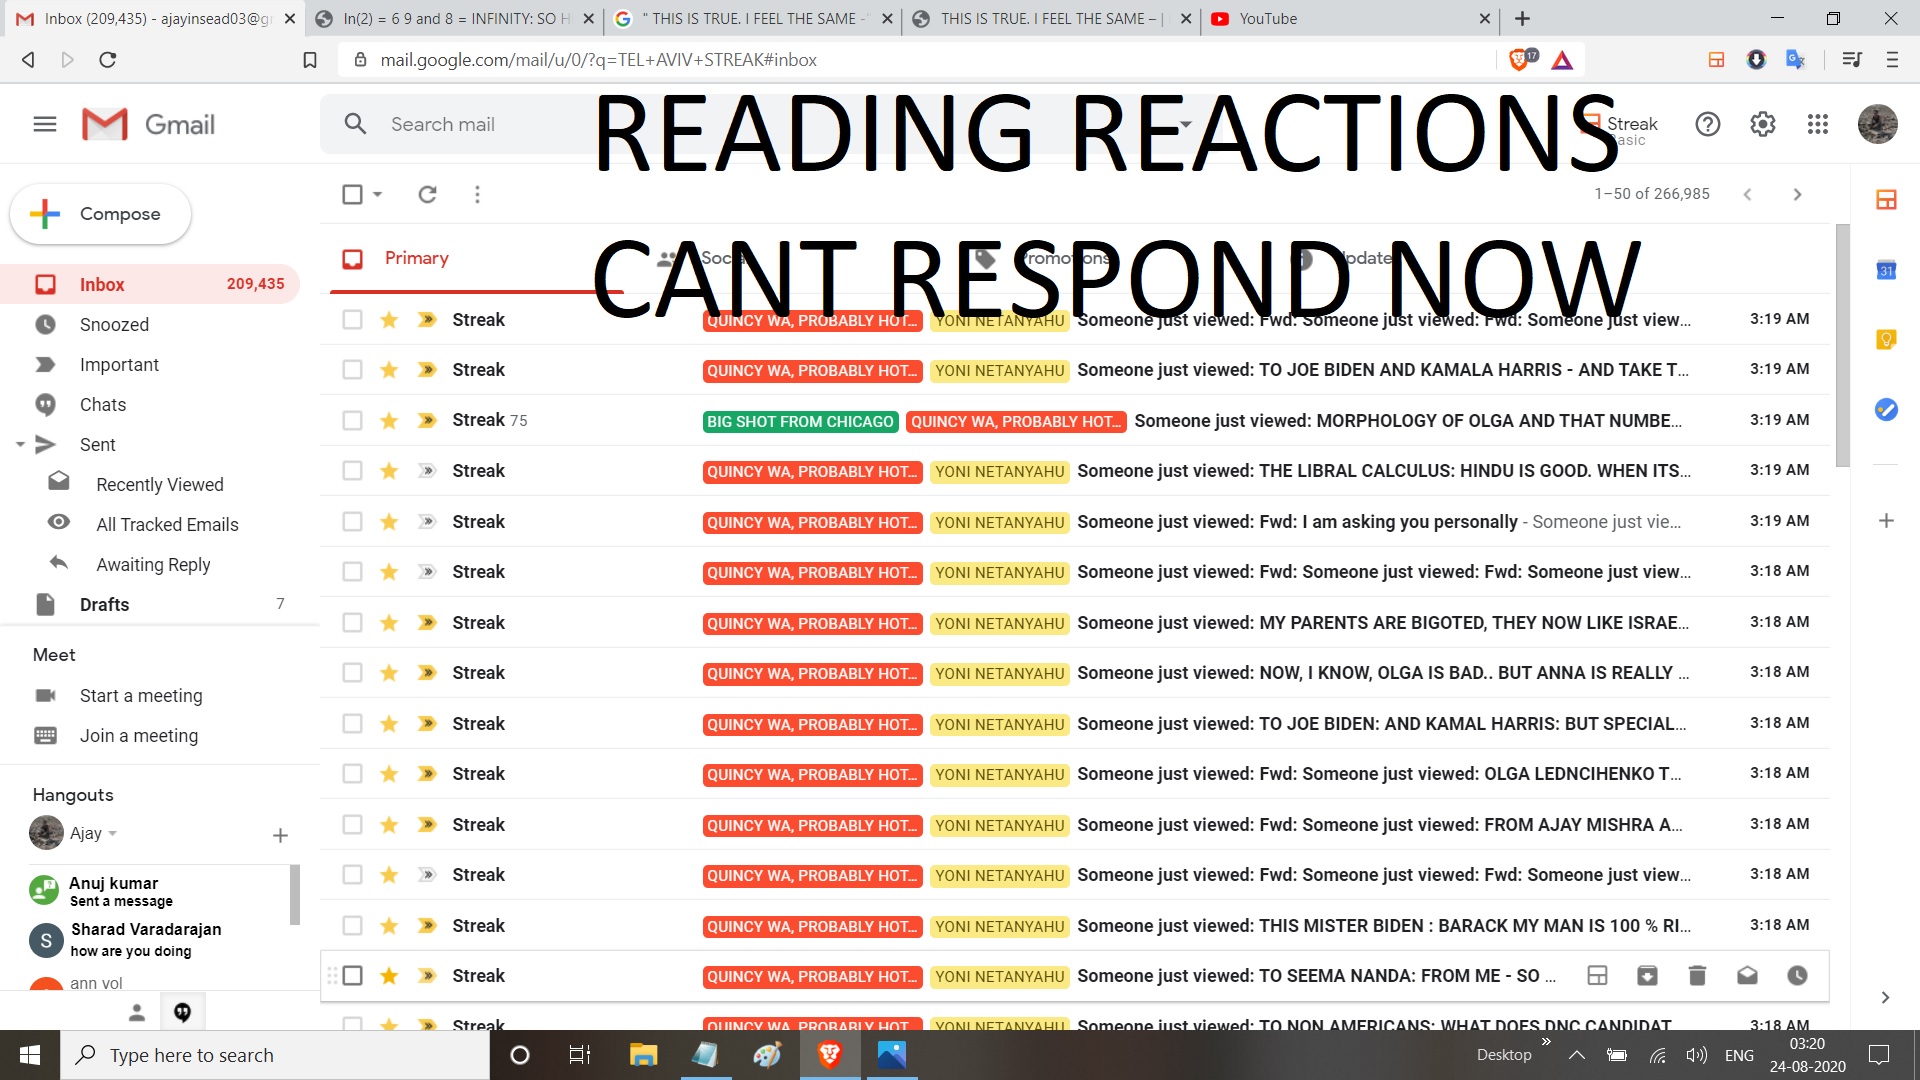 READING REACTIONS CANT RESPOND NOW